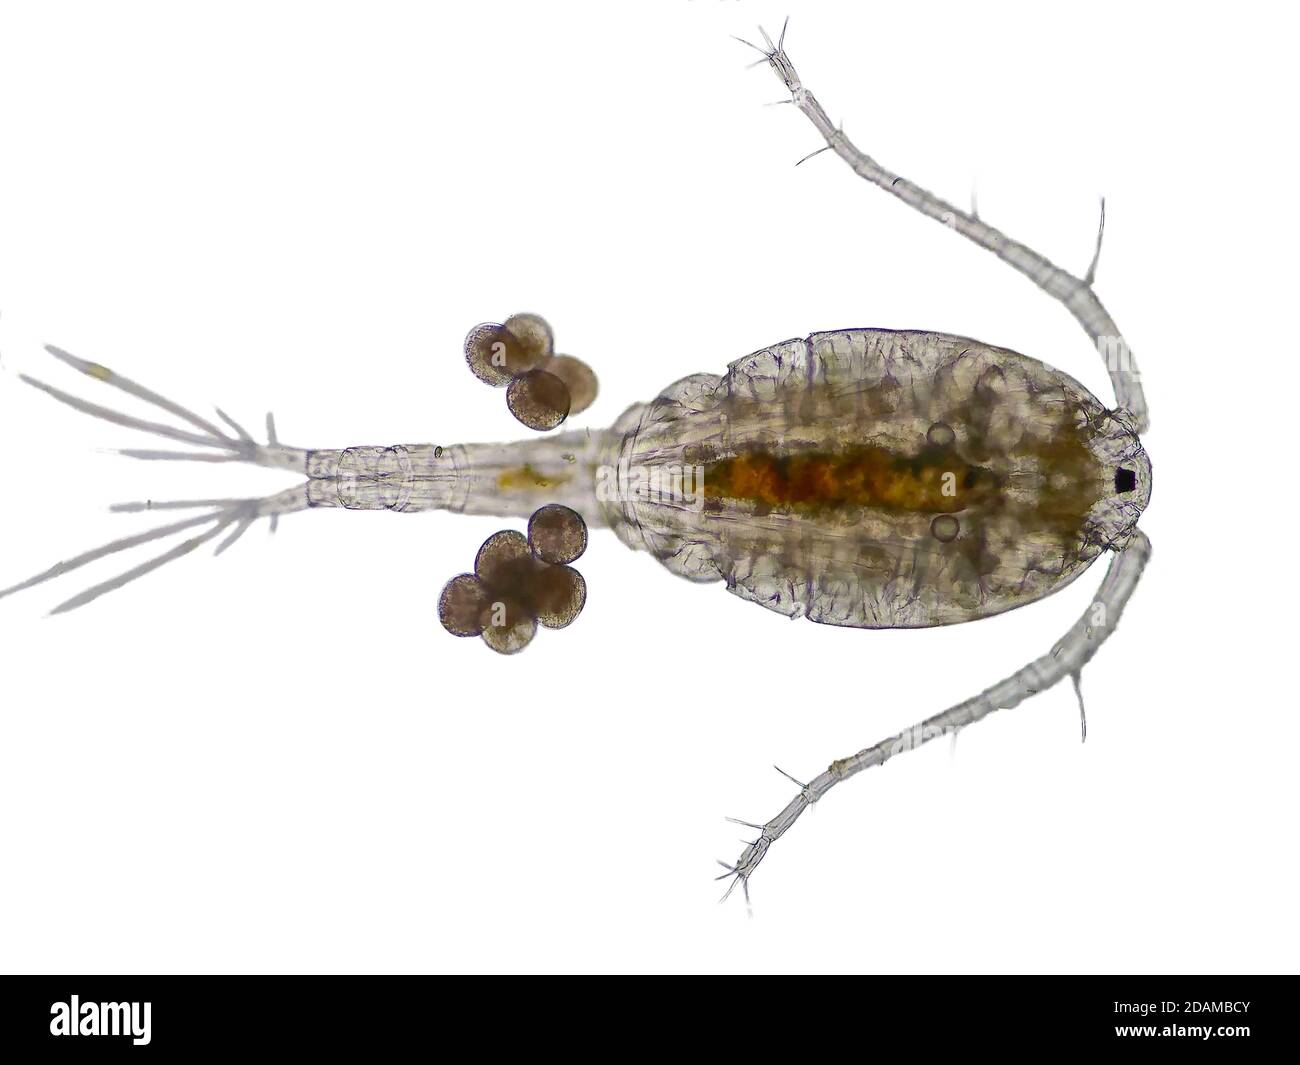 Copepod, light micrograph. Copepods are a group of small crustaceans found in marine and freshwater habitats. Stock Photo